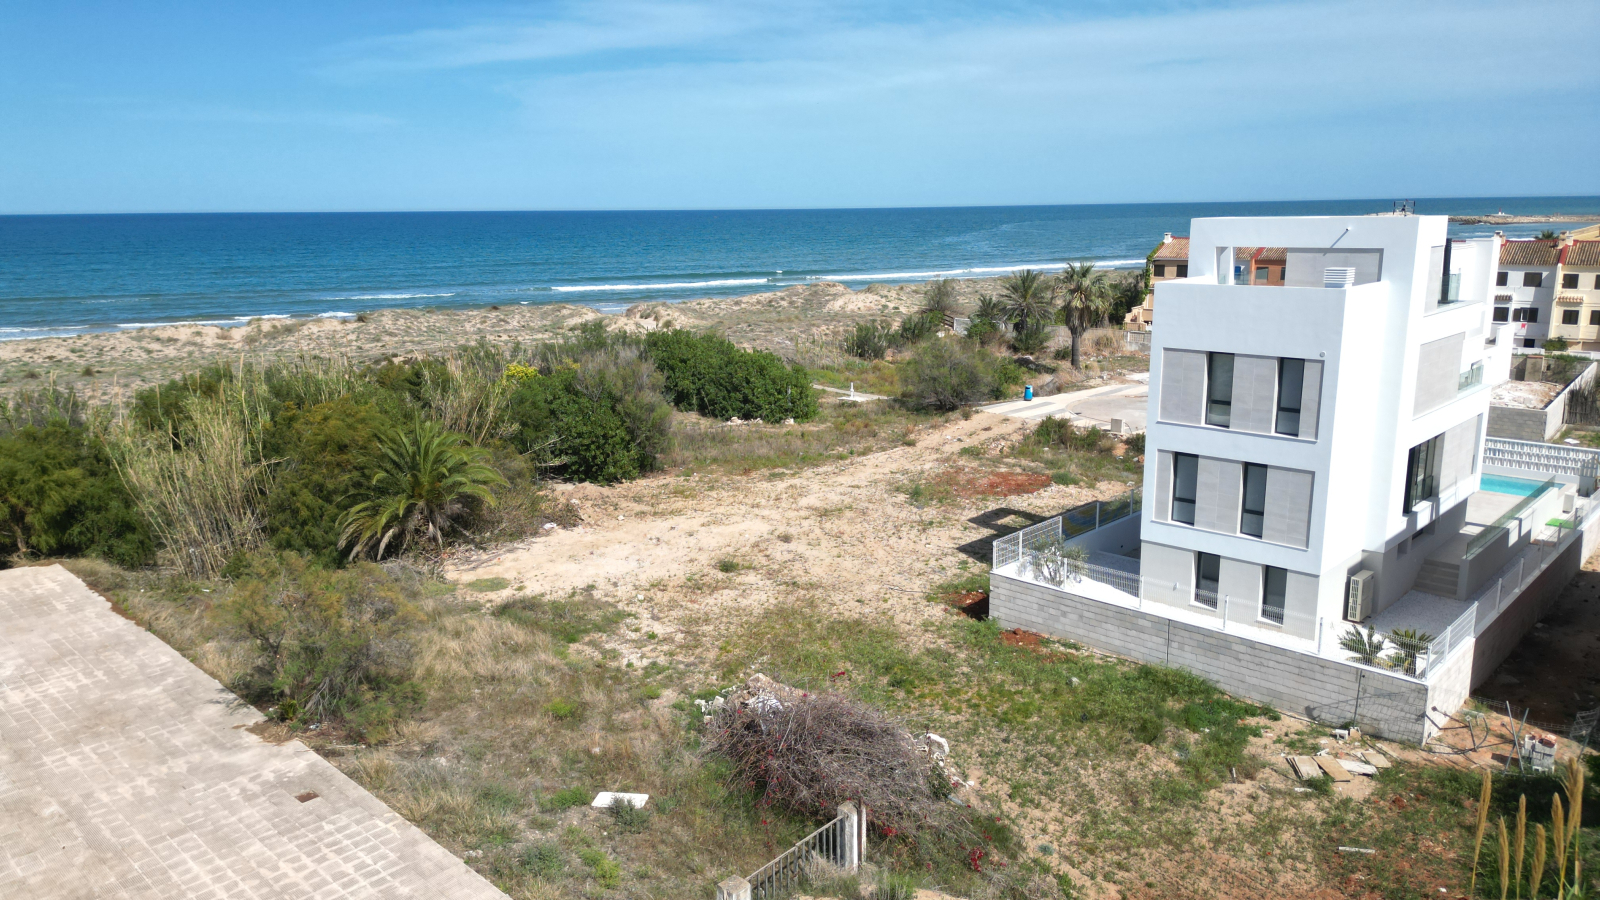 New build luxury villa with direct beach access only a short distance from the harbour and golf course.